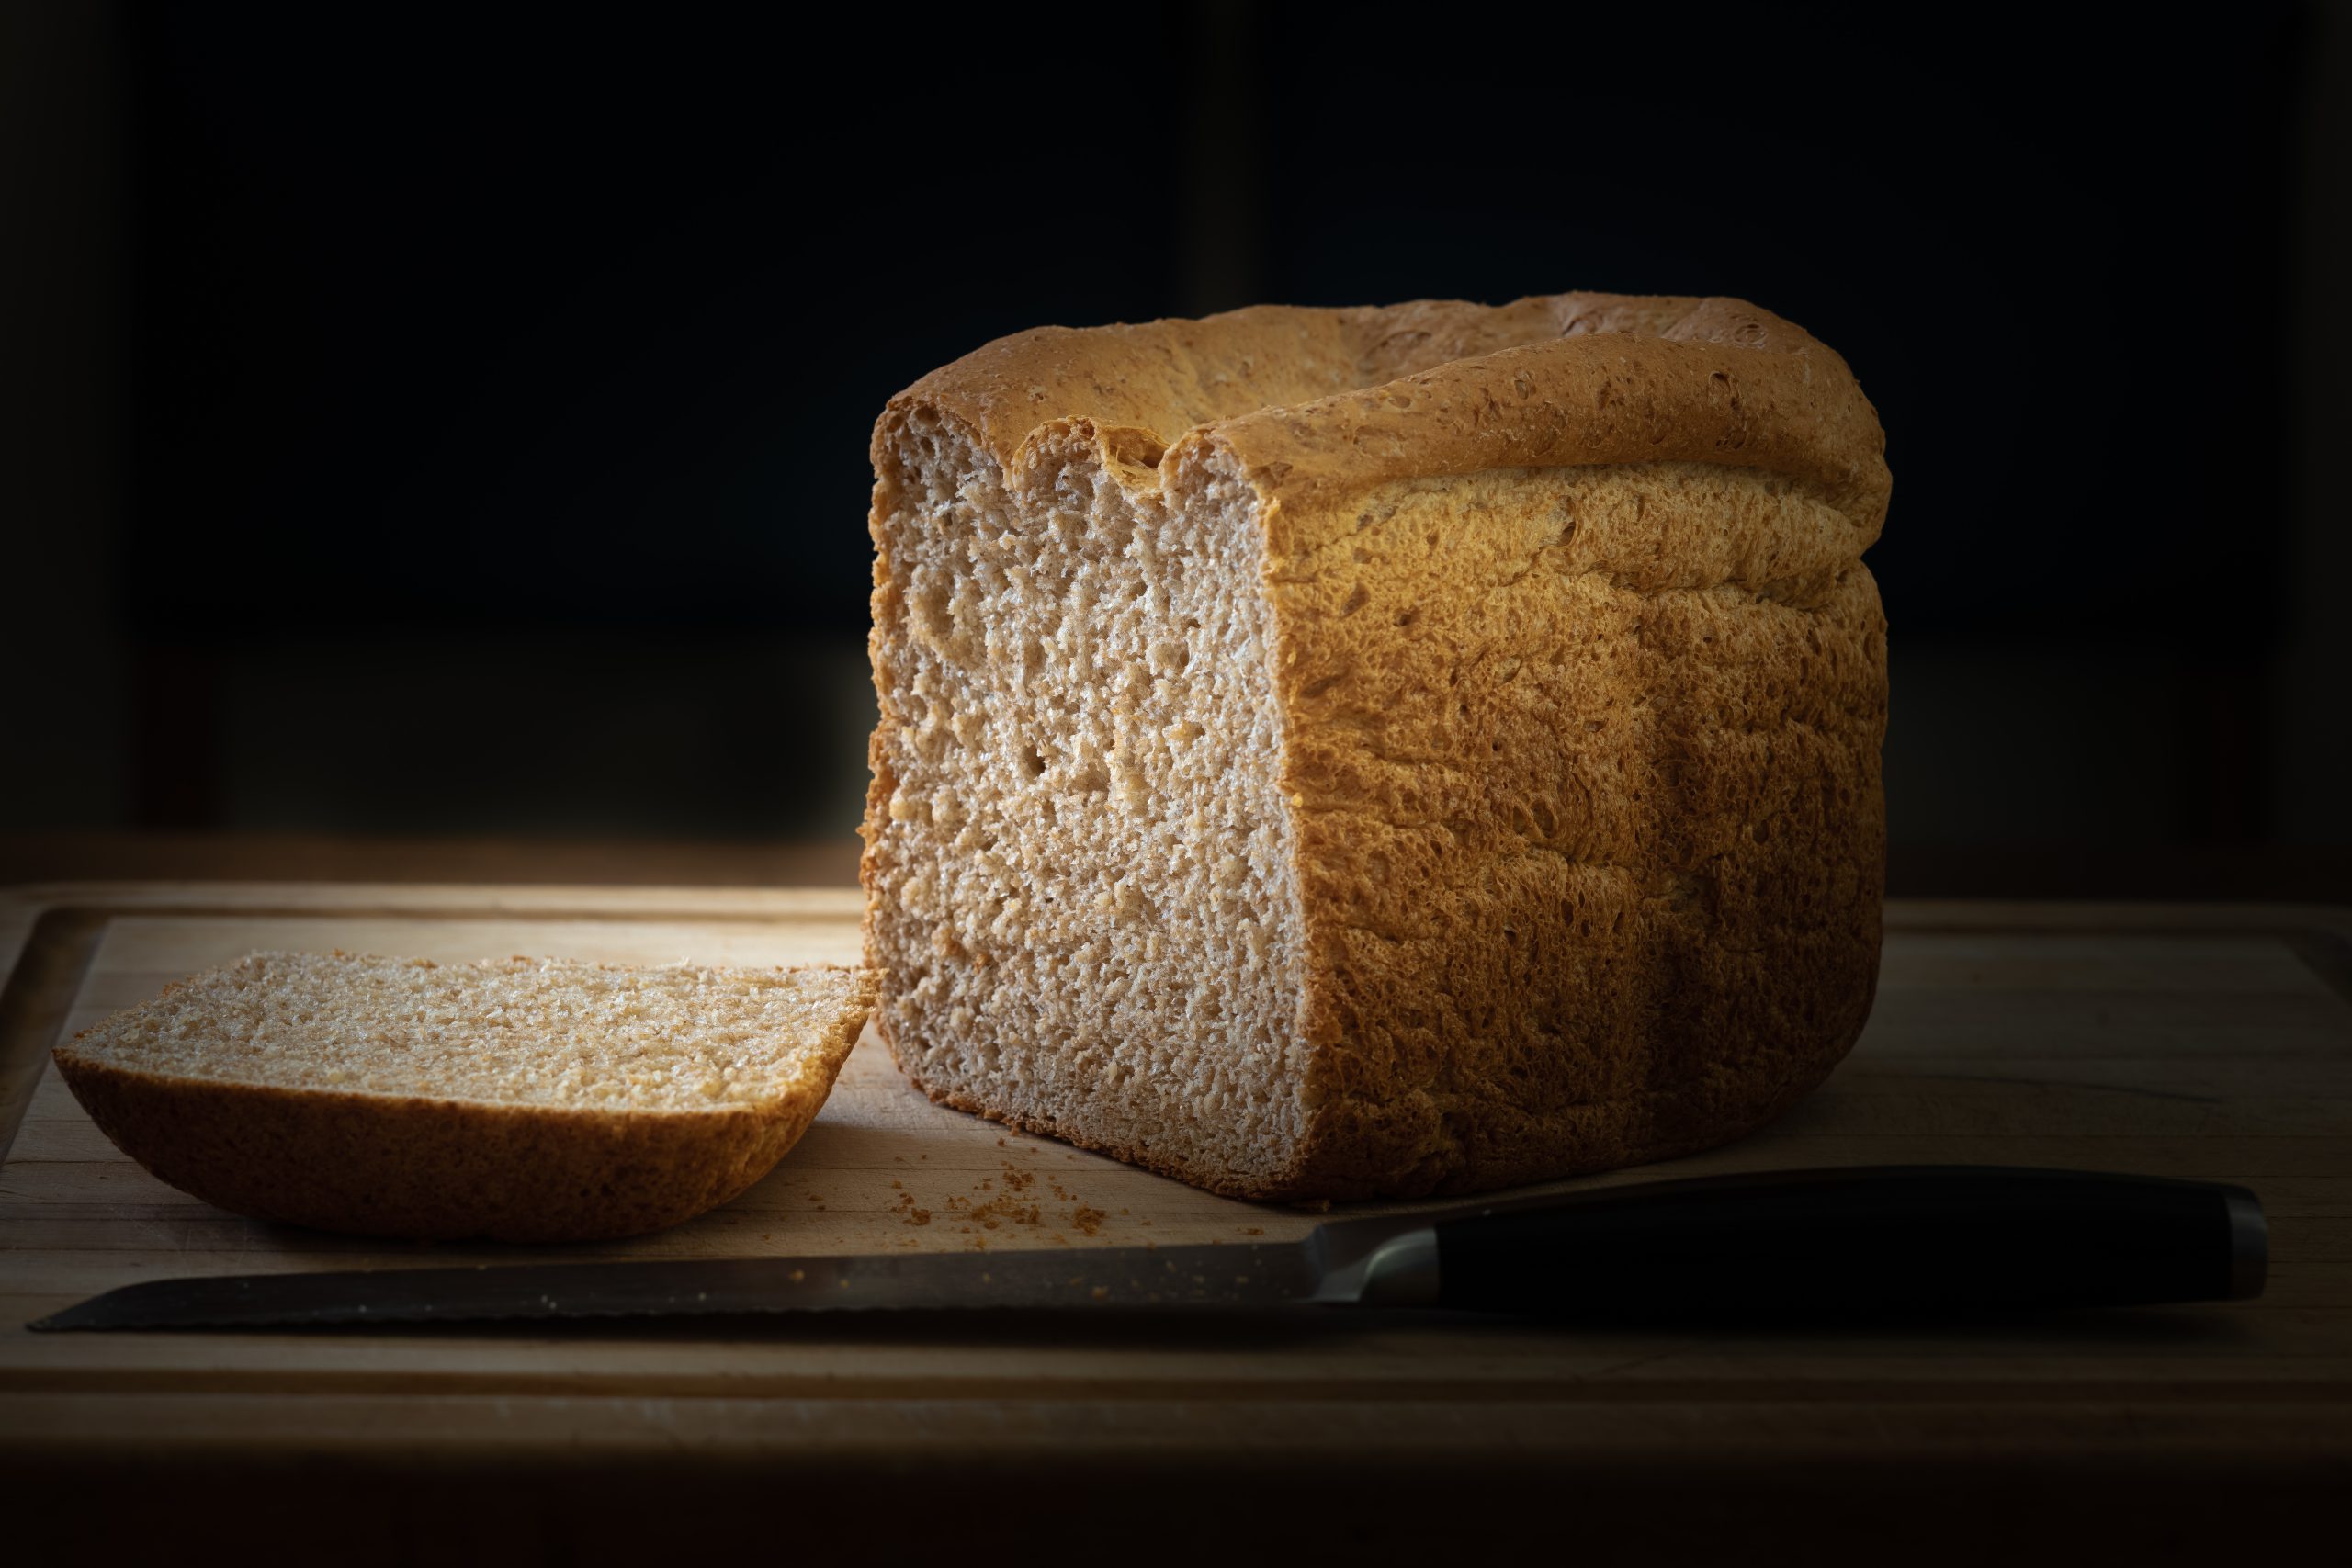 Bakery Product, Bread, Content, Dark, Food, Photography